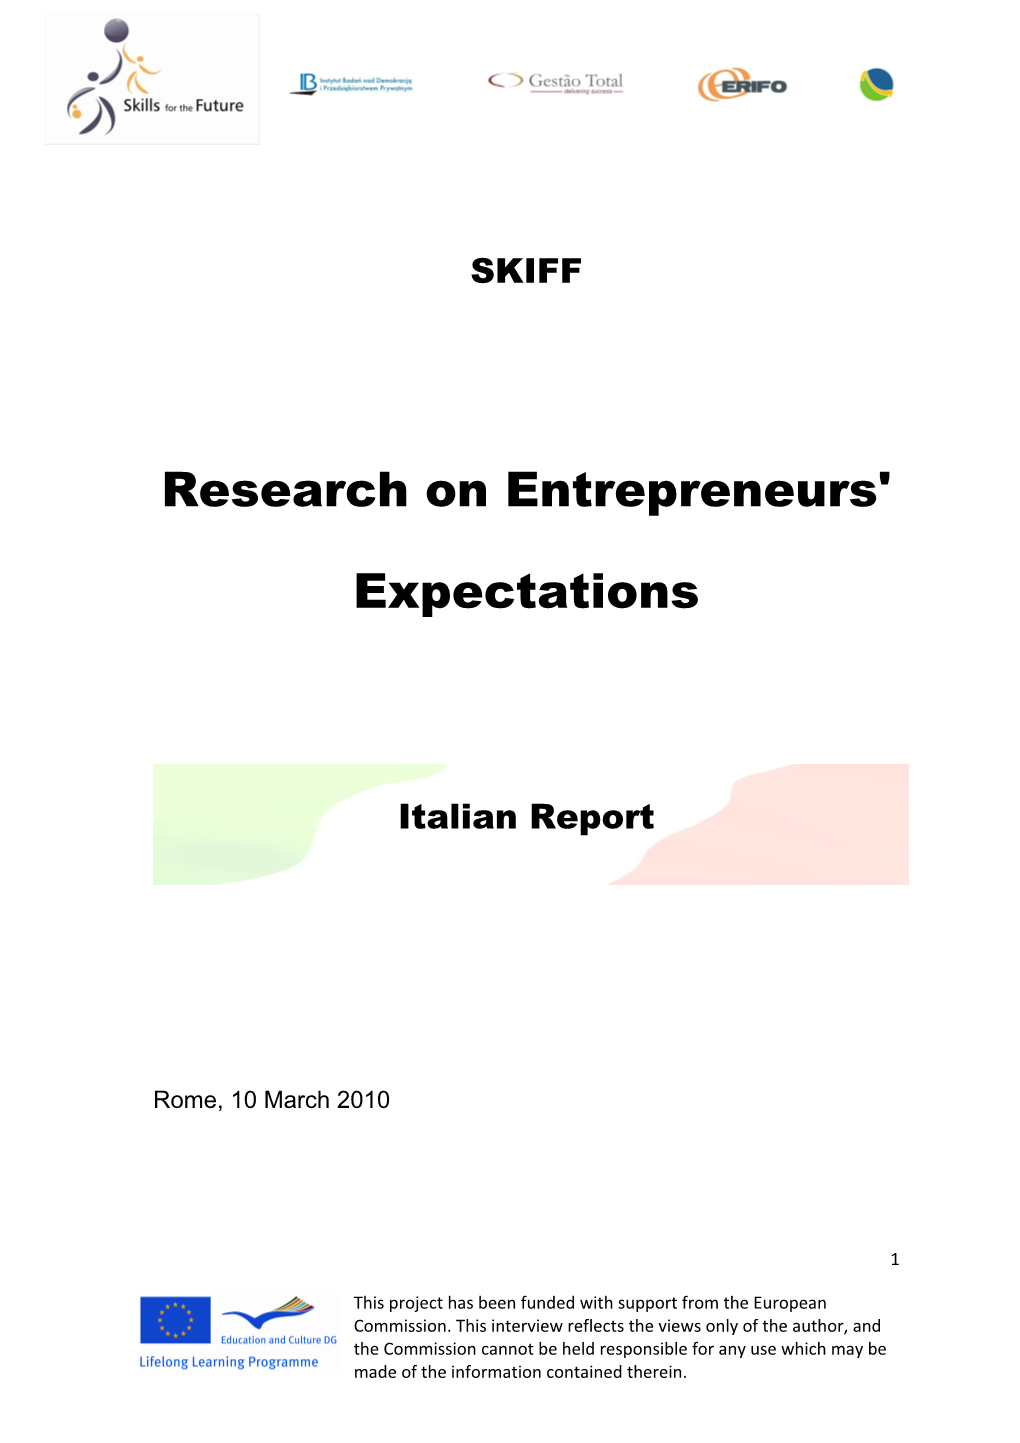 Skiff: Research on Entrepreneurs Expectations